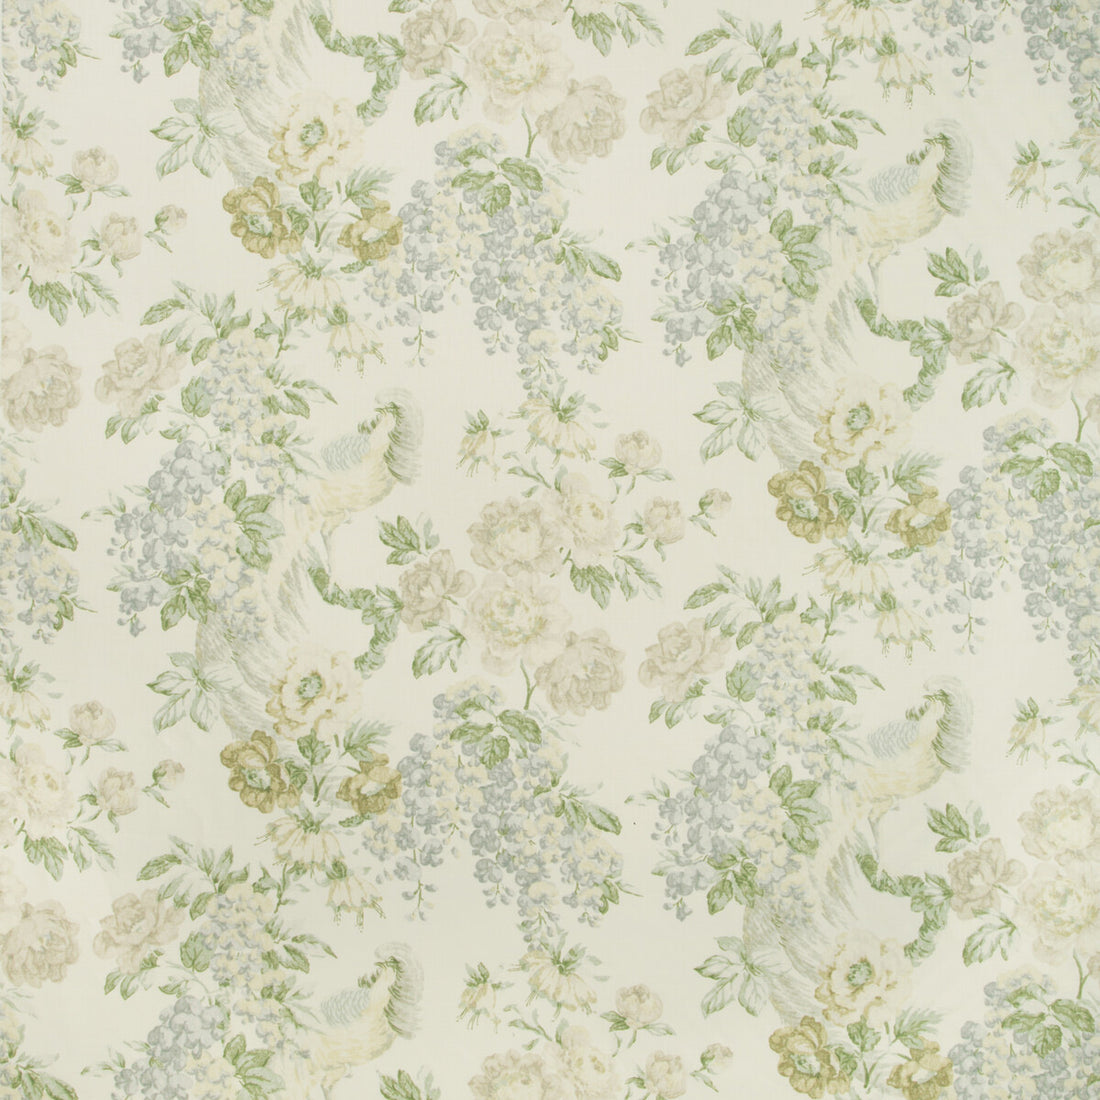 Montecito Floral fabric in sky/green color - pattern 2018139.315.0 - by Lee Jofa in the Suzanne Rheinstein III collection